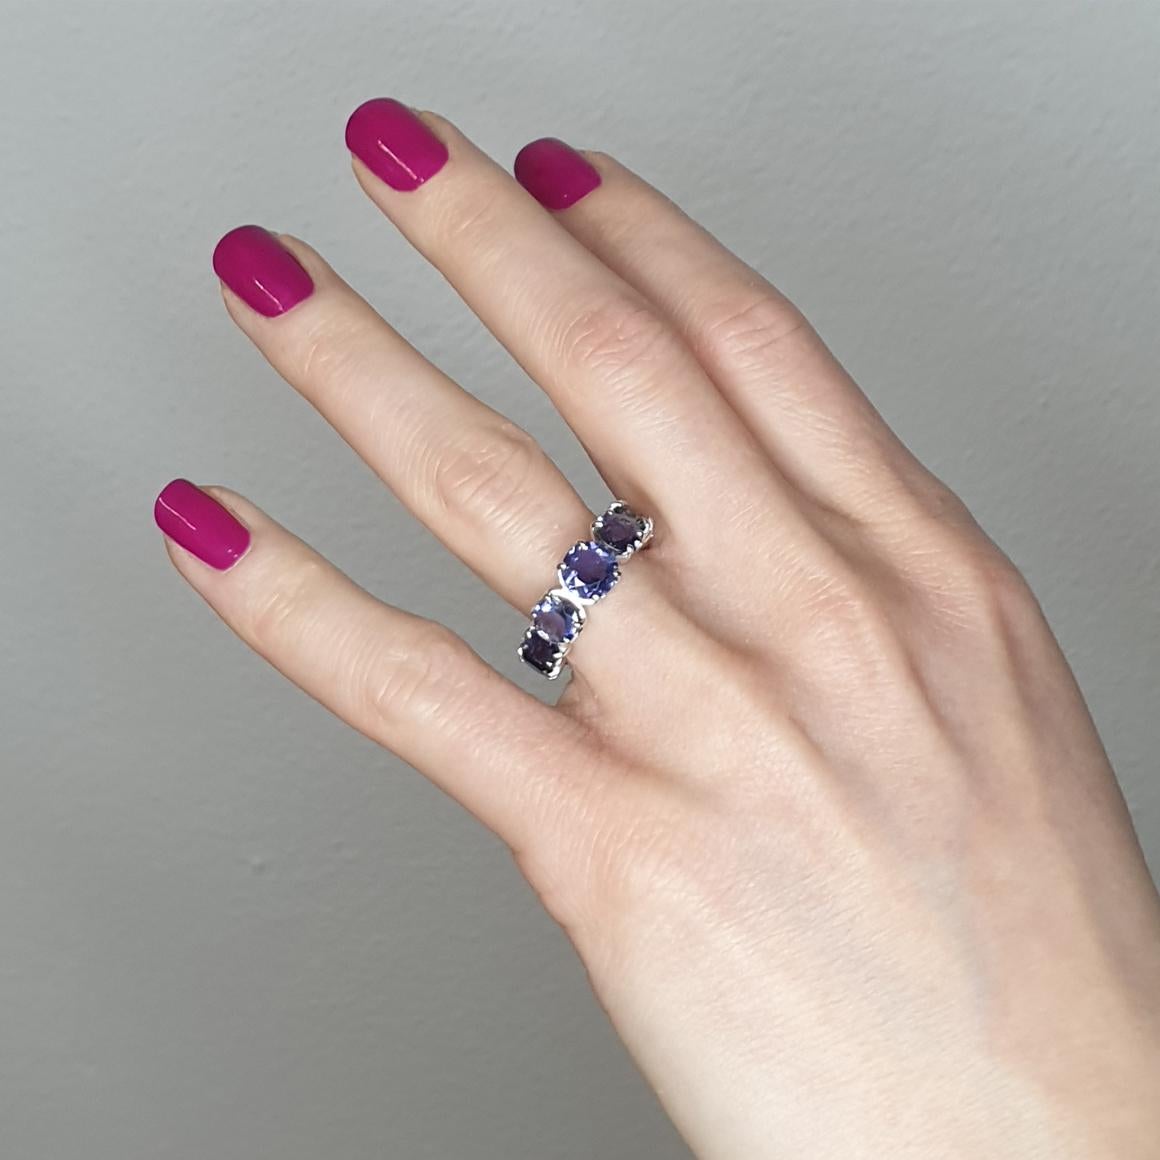 Classic and trendy ring , not only wedding ring but also a ring for every occasion with fantastic colors. Design and craftmanship made in Italy by Stanoppi Jewellery since 1948.

Classic ring in 18 karat gold with Iolite cut (size: 7, 6, 5, 4mm)